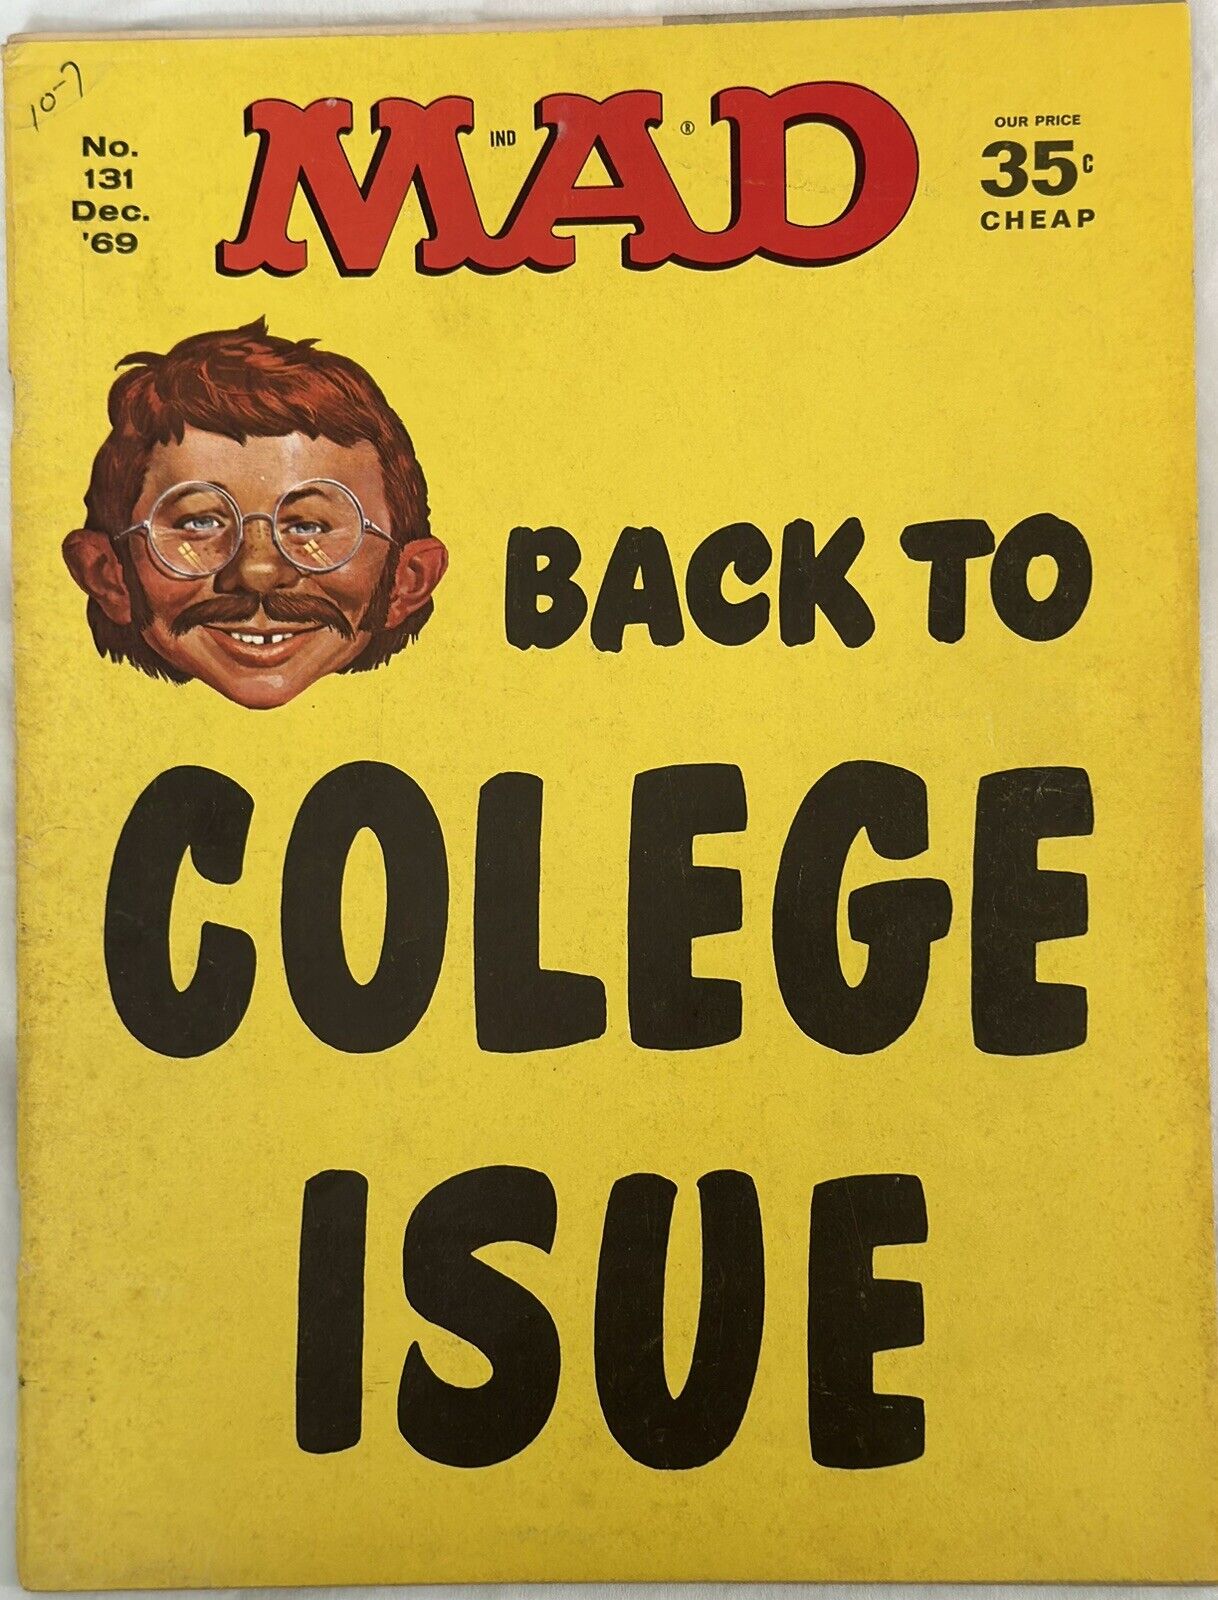 MAD MAG:  #131 December 1969; Pen Mark Makes VG To Good Condition, In SLV Fr Shp